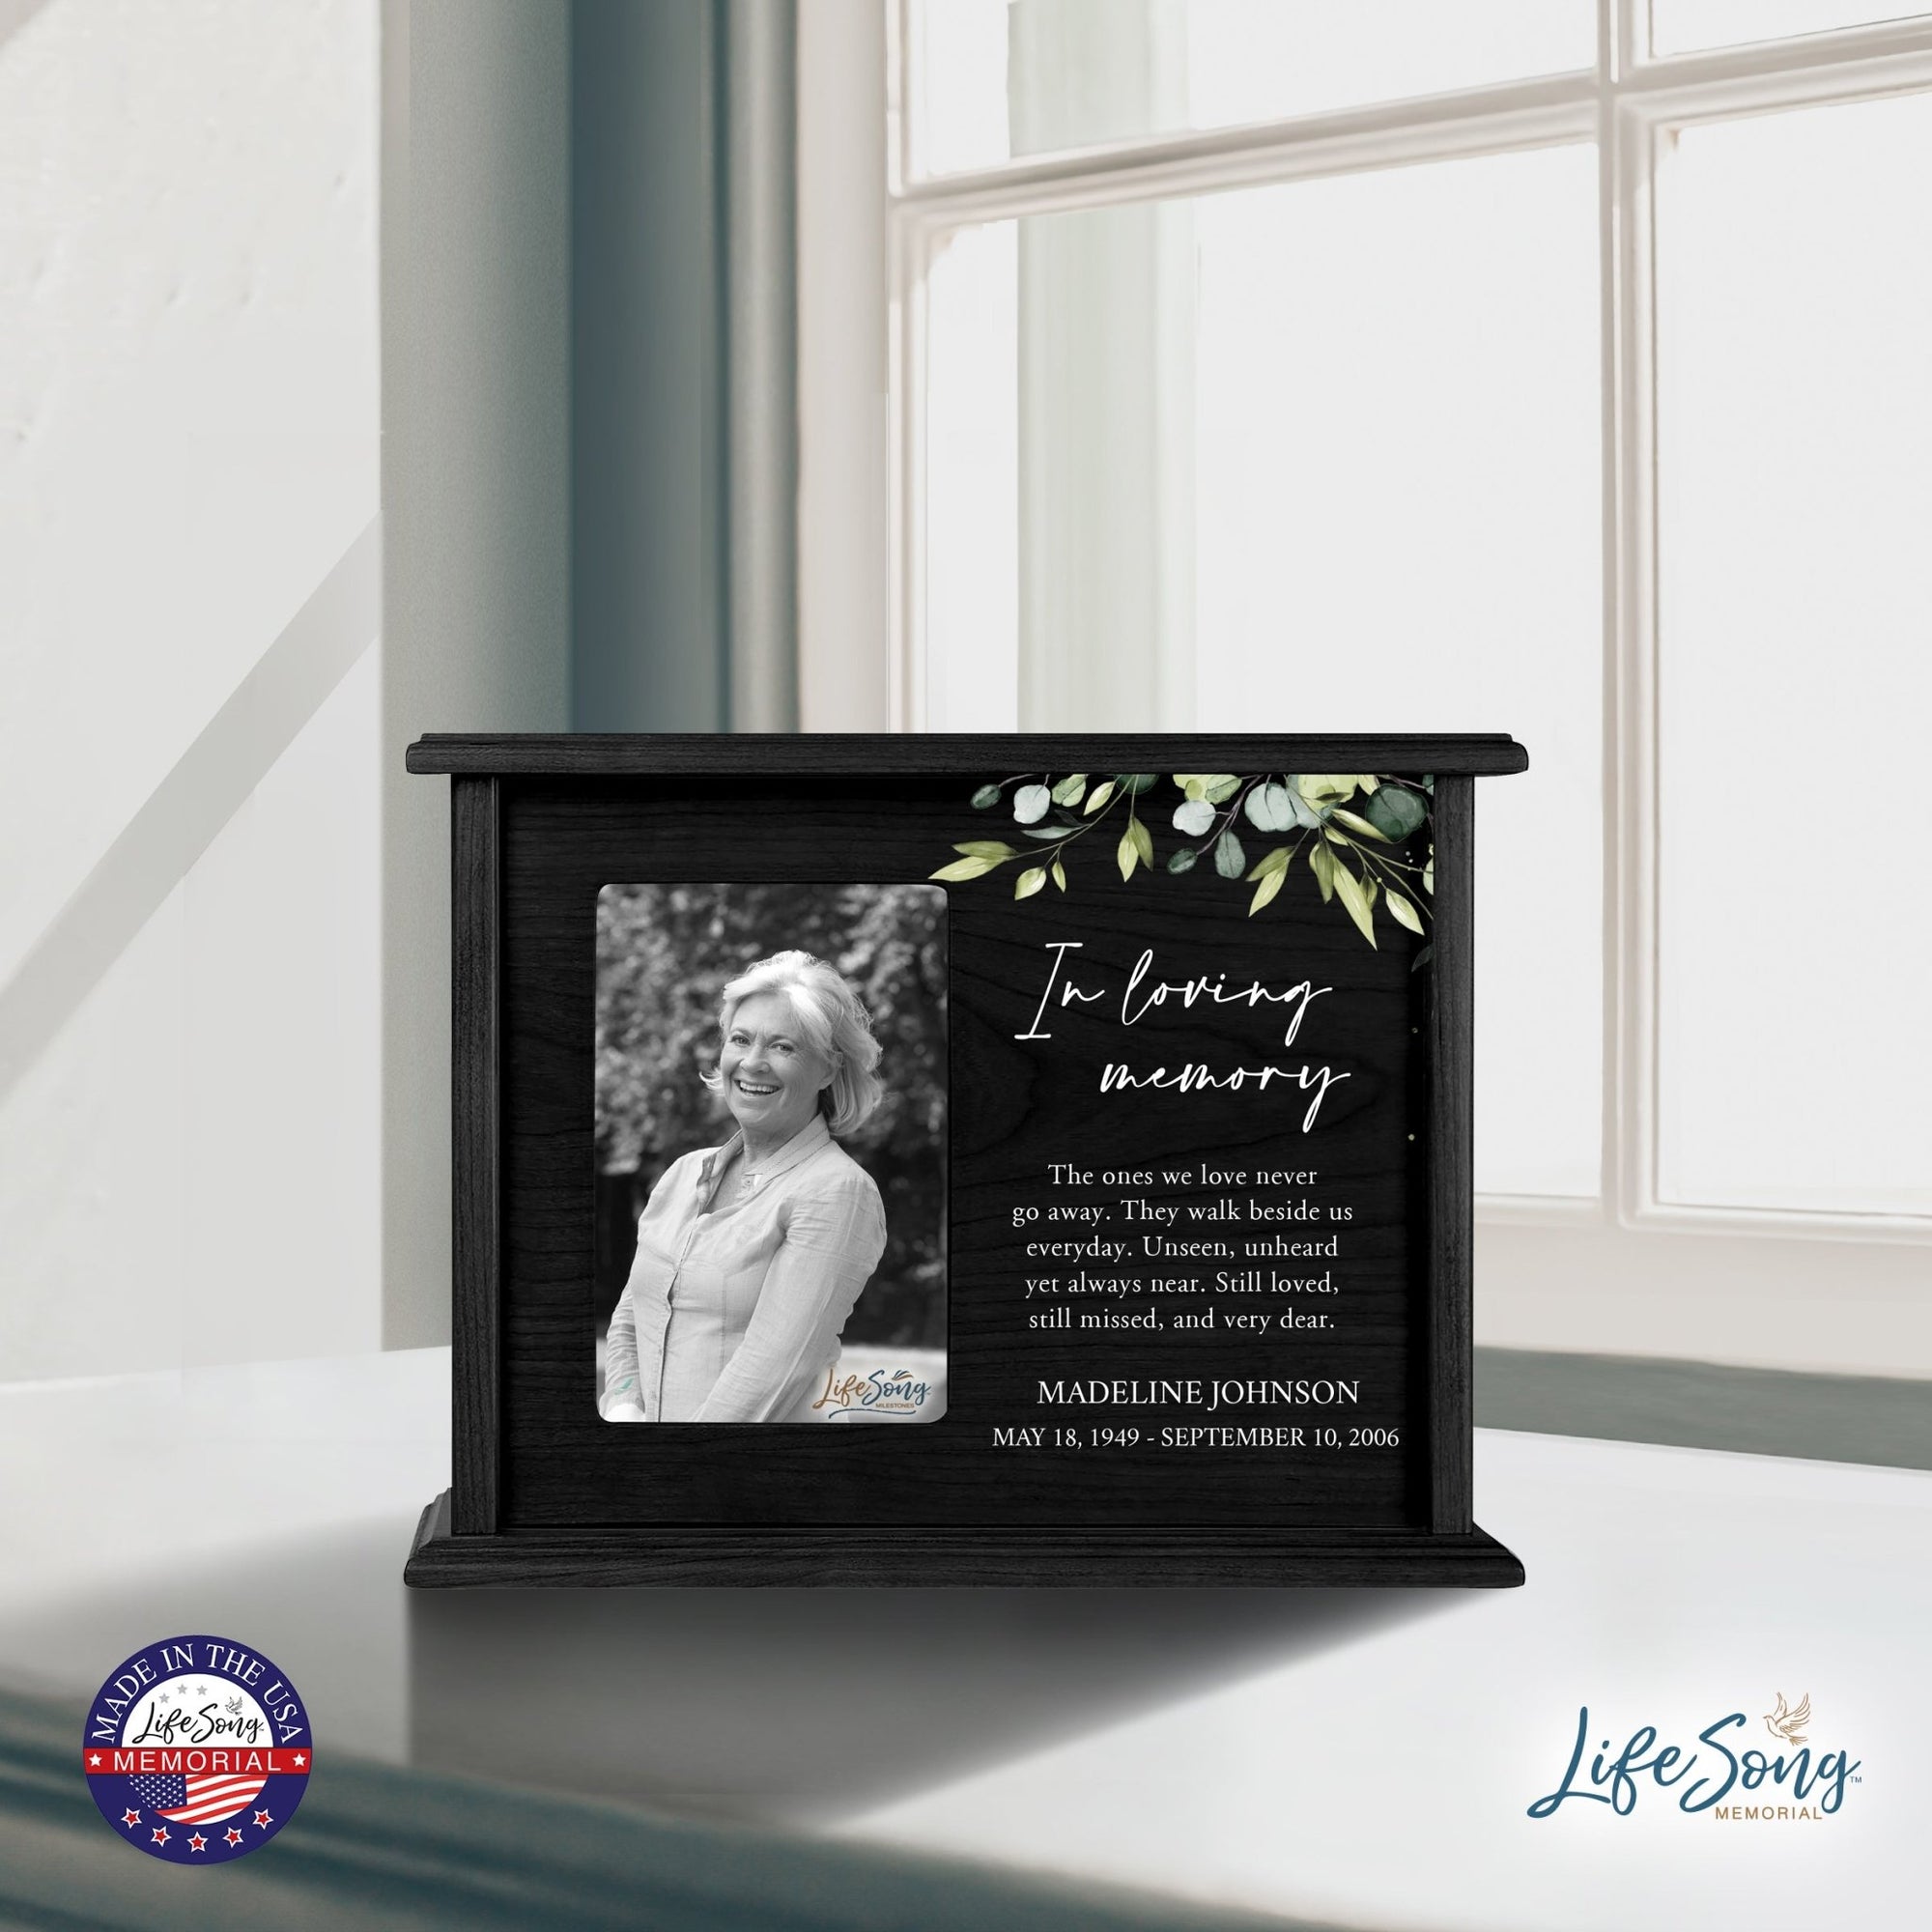 Personalized Memorial Cherry Wood 12 x 4.5 x 9 Cremation Urn Box with Picture Frame holds 200 cu in of Human Ashes and 4x6 Photo - In Loving Memory (Unseen) - LifeSong Milestones